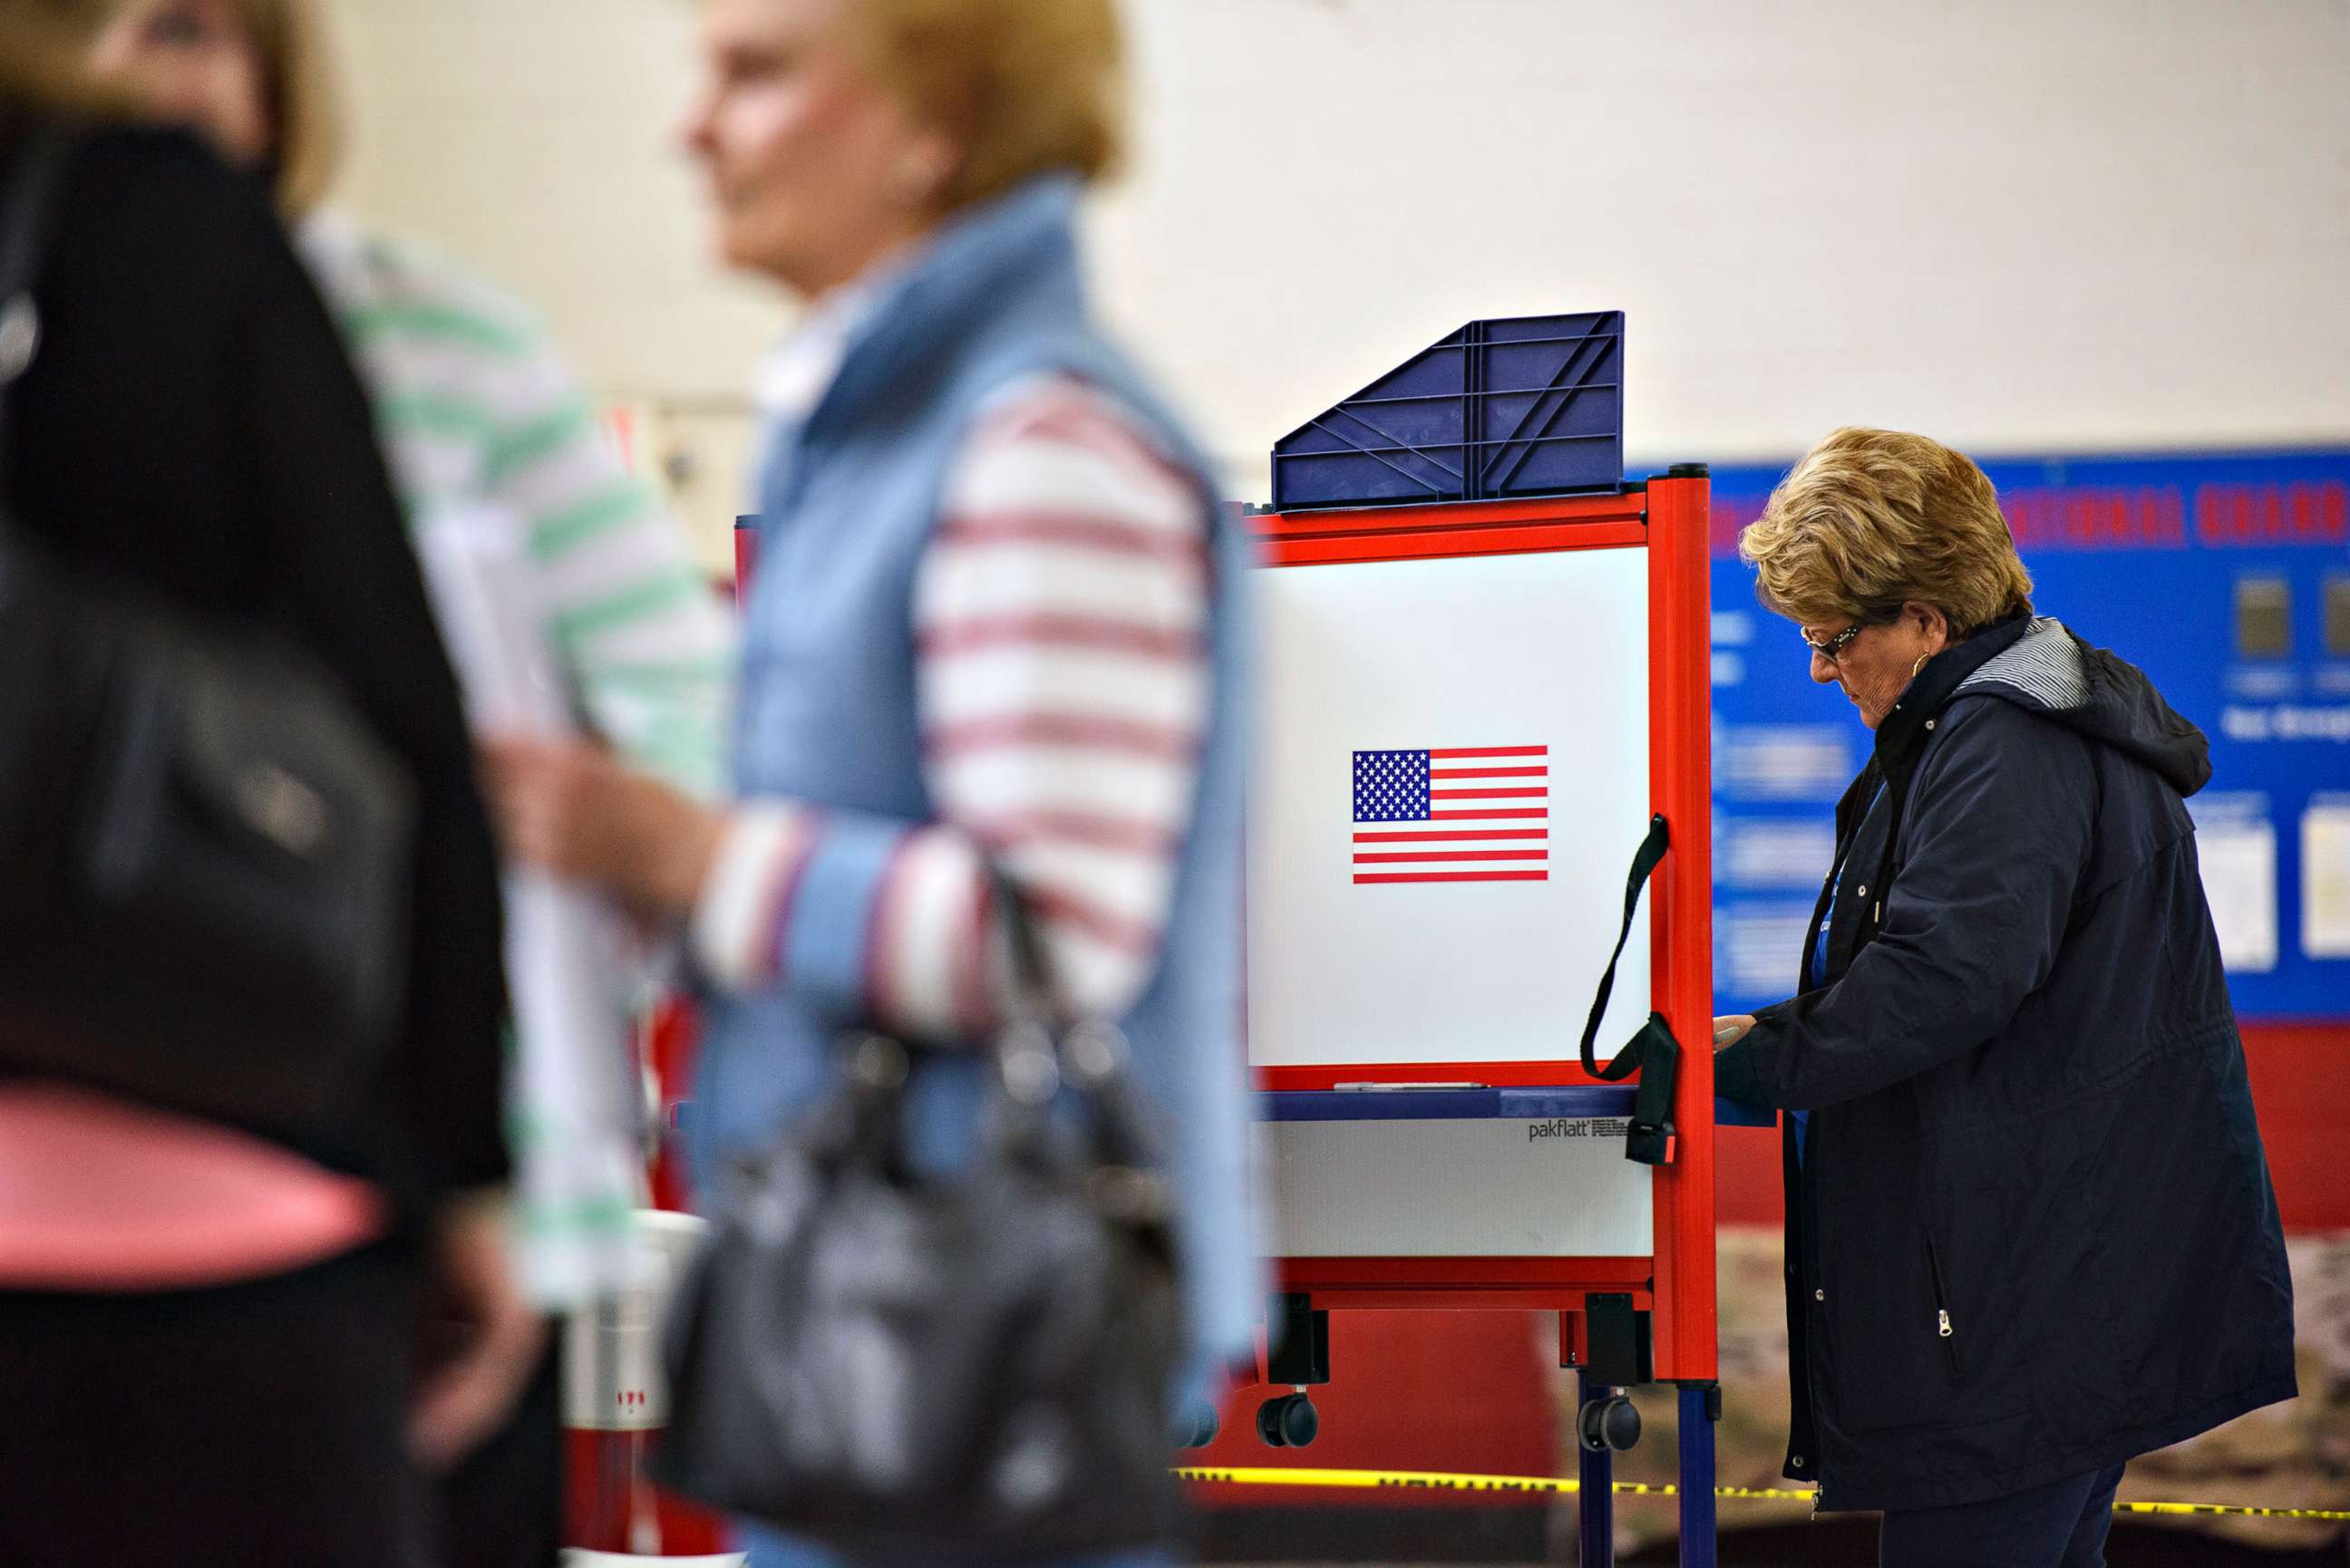 PHOTO: A woman fills out a ballot at a polling place during Super Tuesday voting on March 3, 2020, in St. Pauls, N.C.